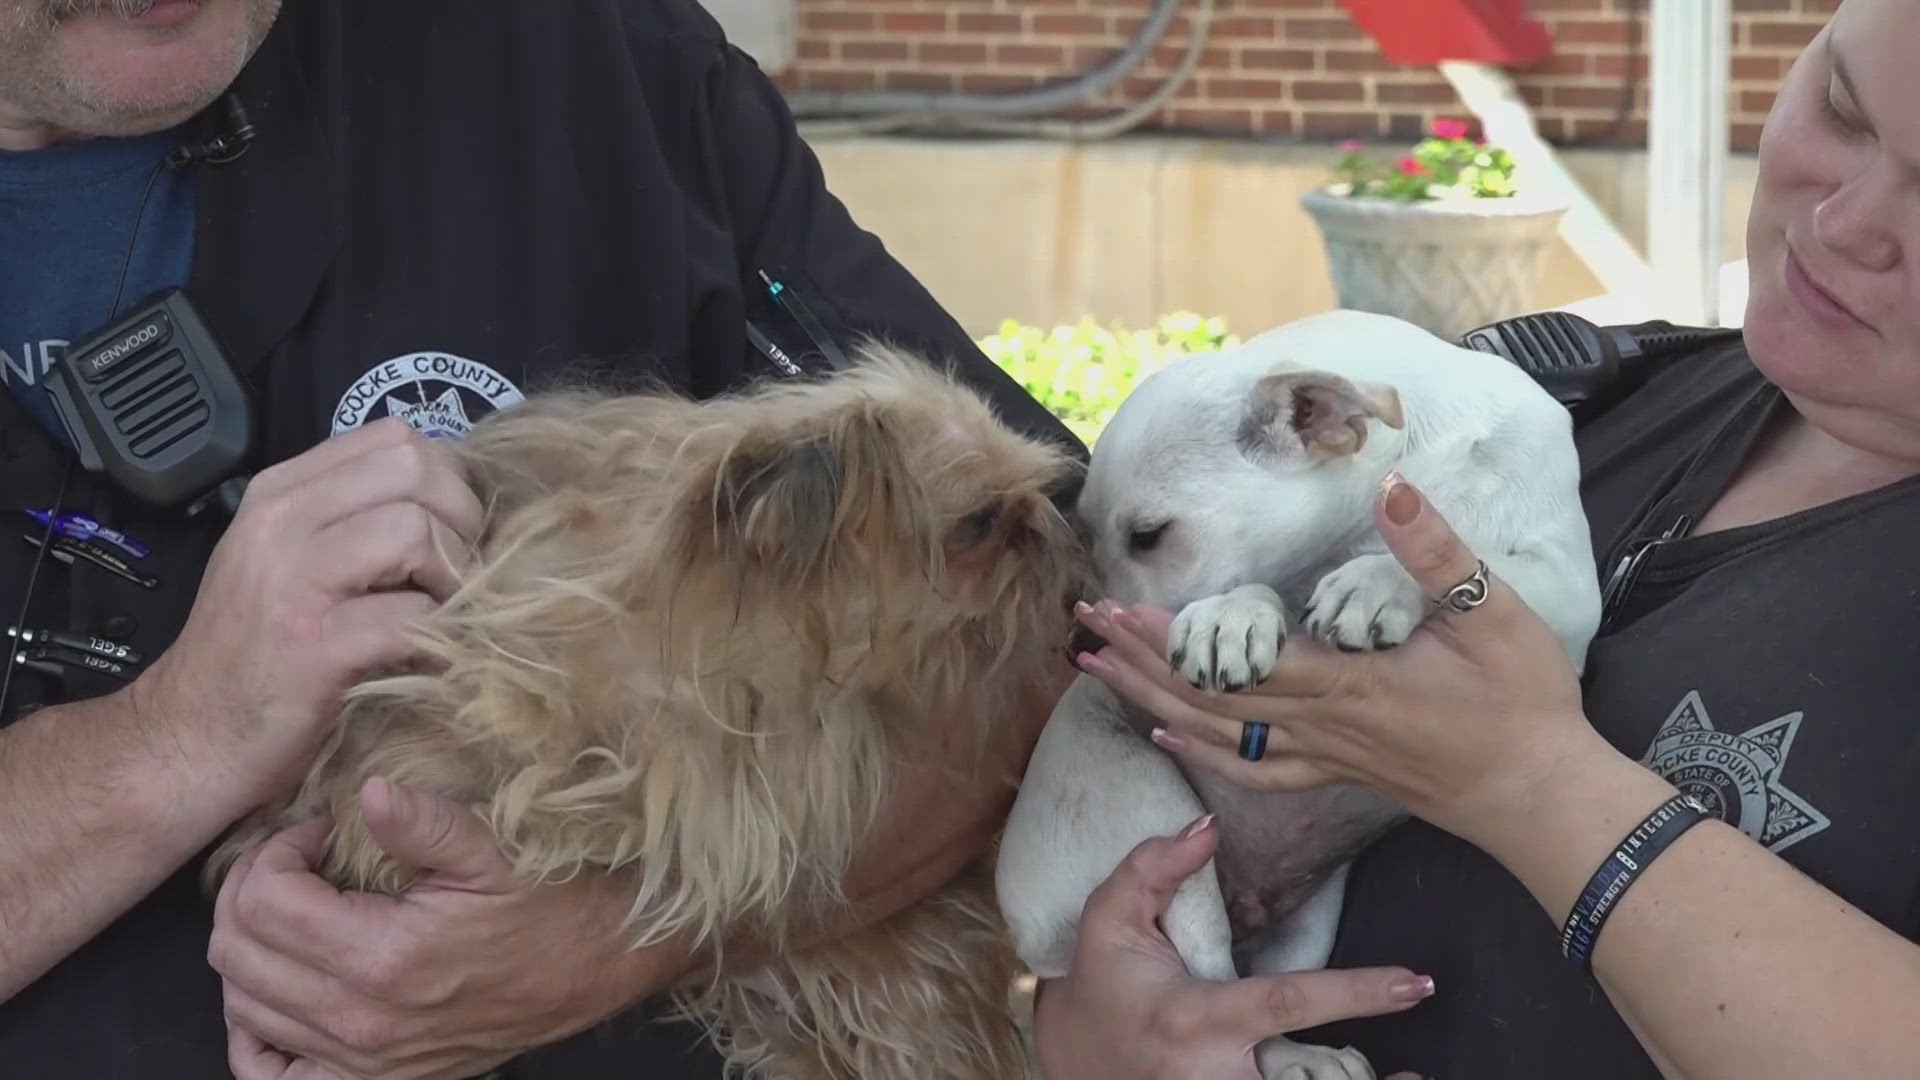 Since January, Cocke County Animal Control Services said they’ve rescued more than a couple of dozen dogs.